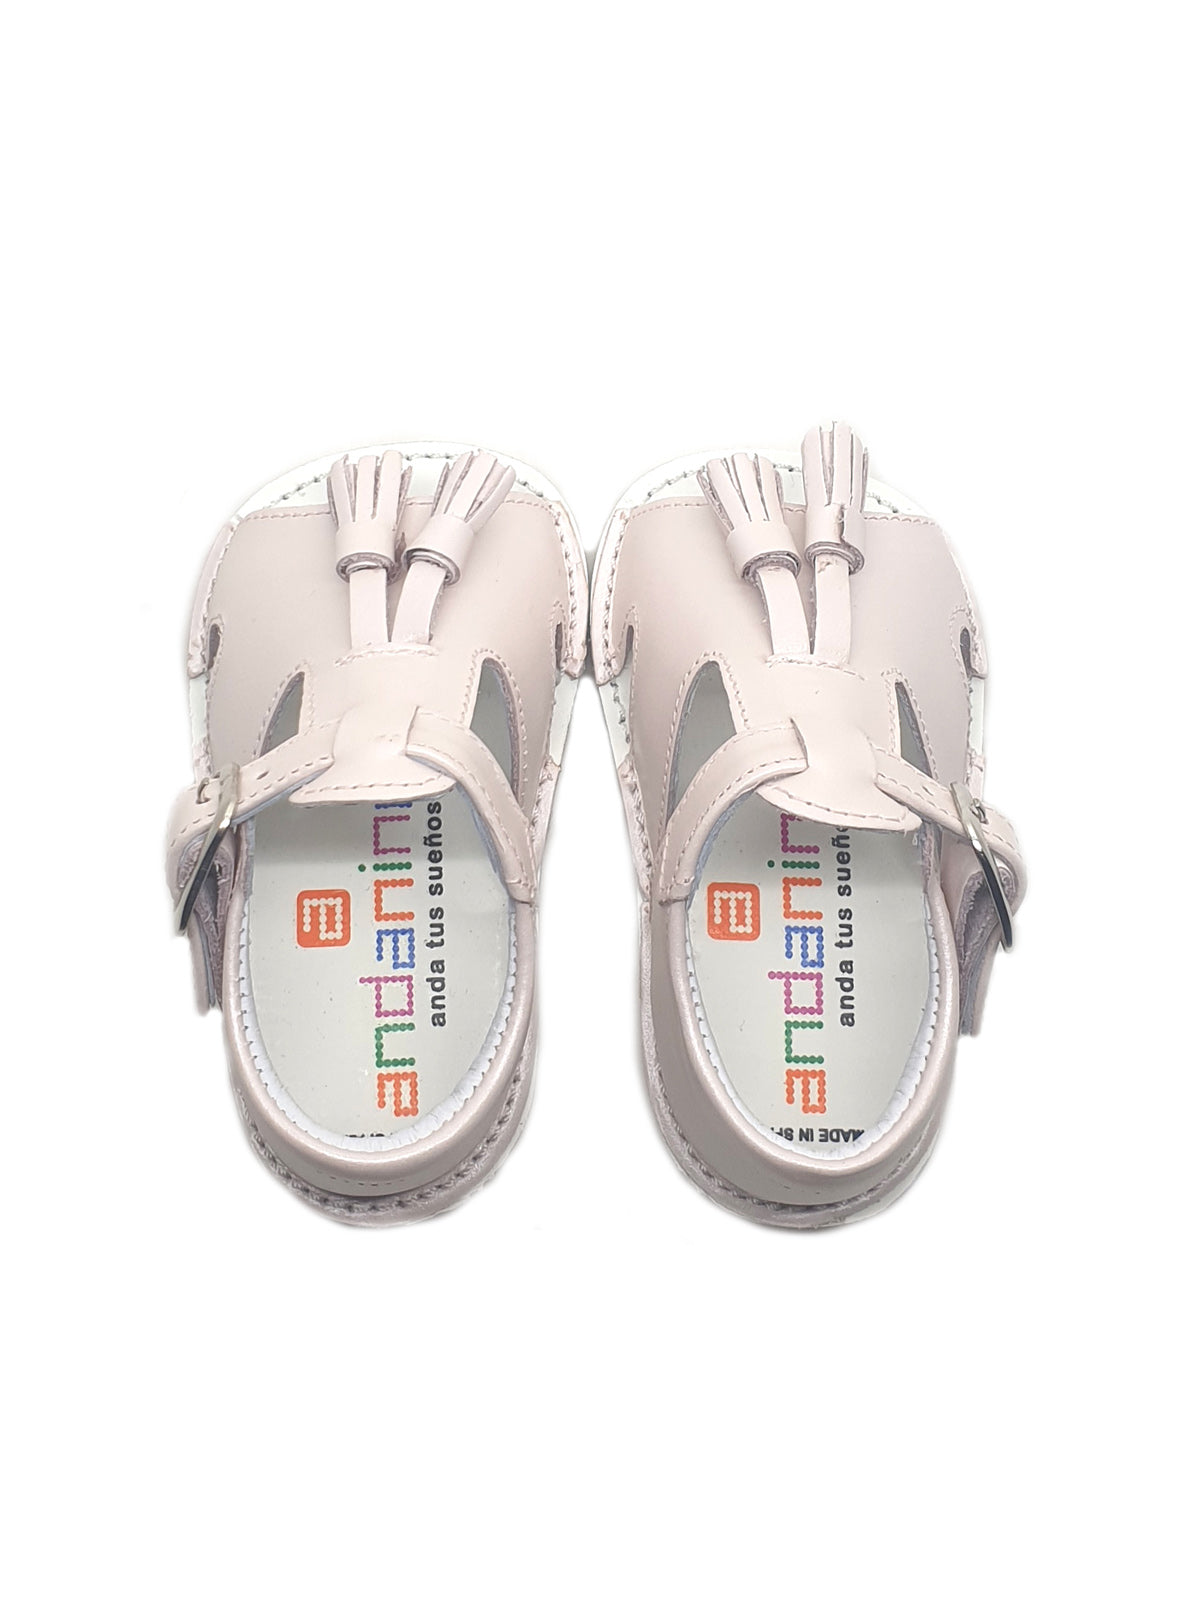 Baby's leather sandals with tassel trims